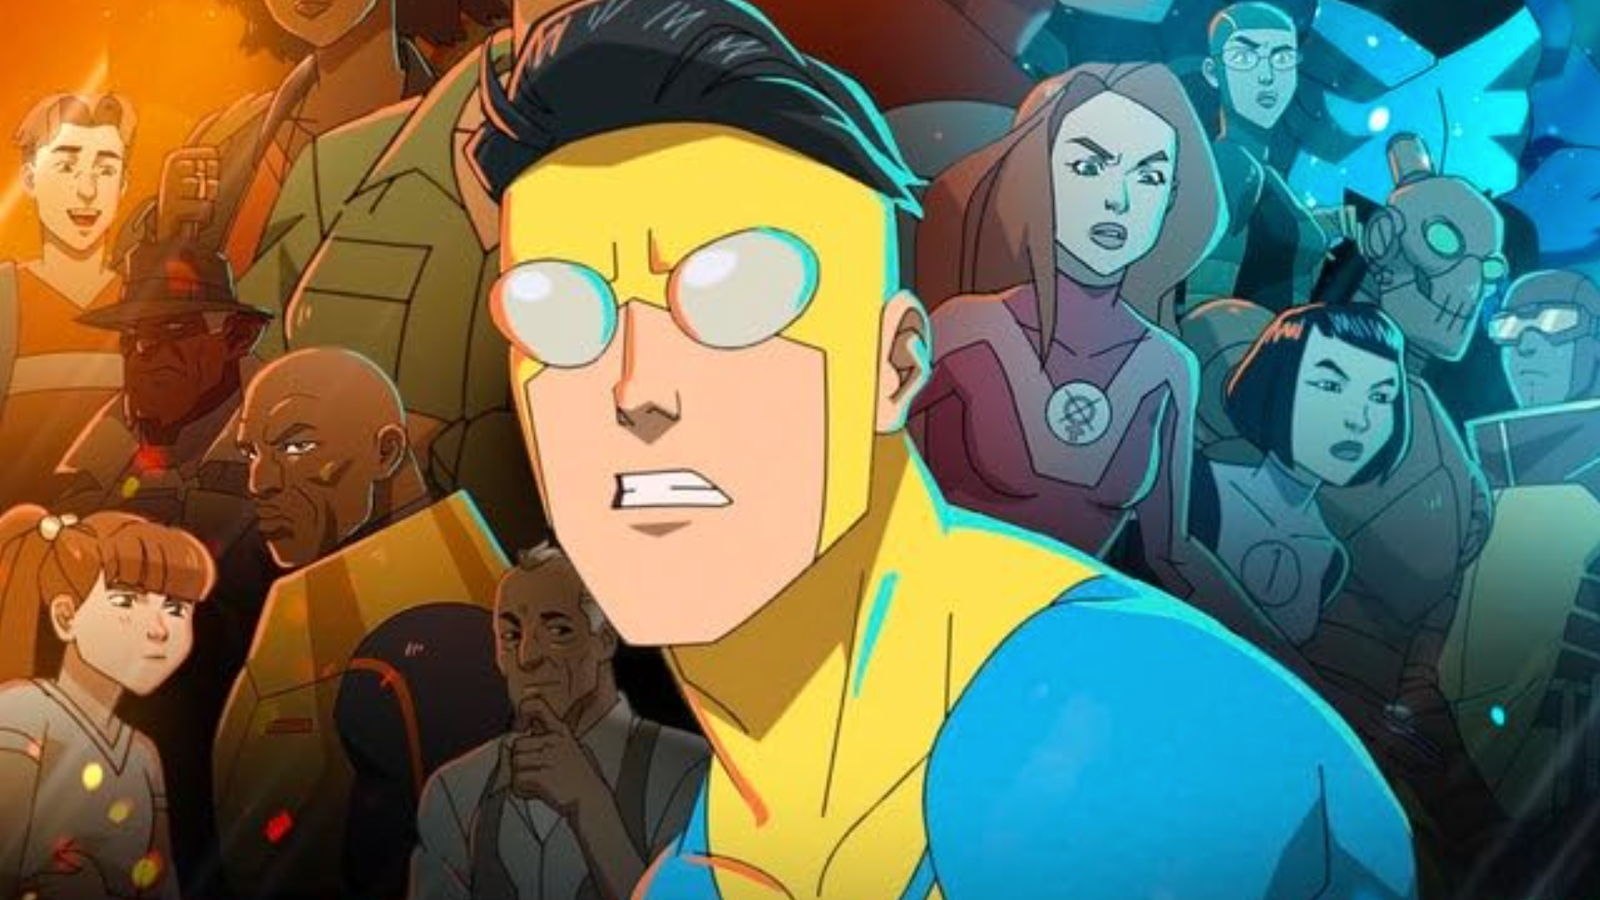 Invincible Season 2 Reveals First Look at Angstrom Levy